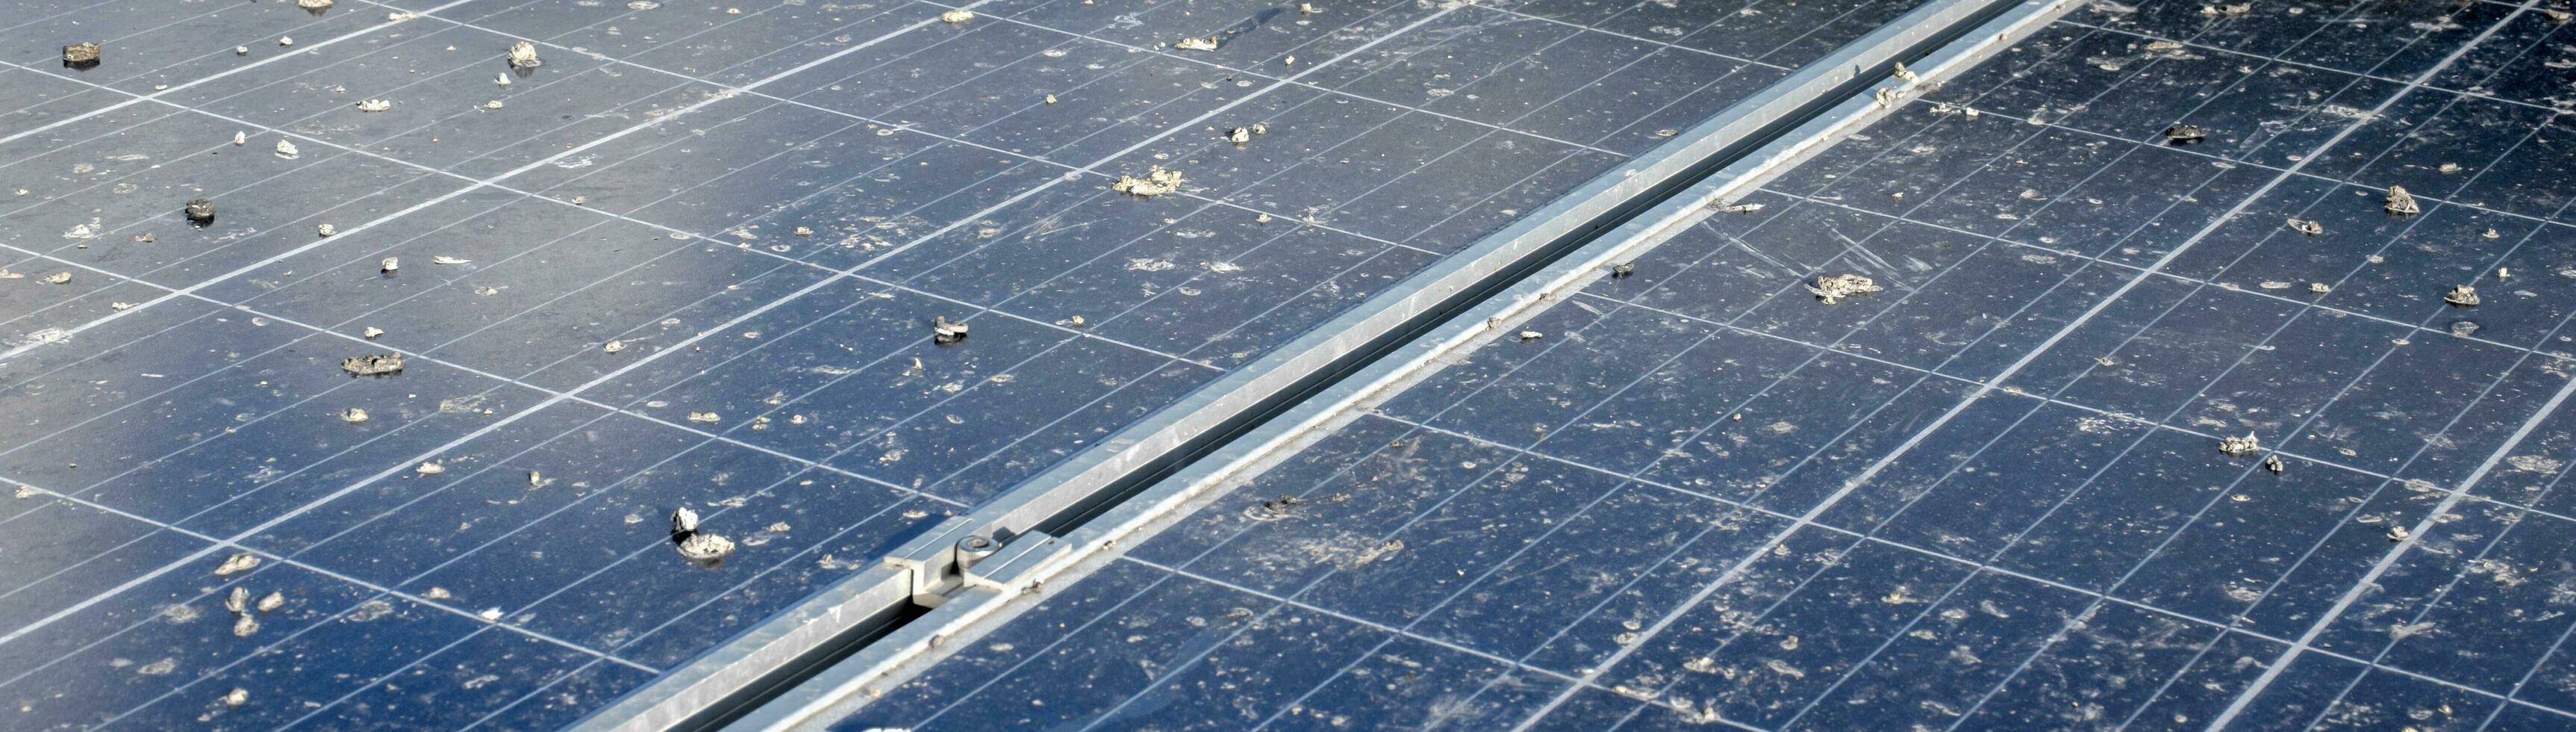 Upper surface of solar rooftop which has been used for a long time is stained with dust, bird droppings, dirt, smog and rainwater stains, concept for cleaning, washing and maintainance, cropped shot. photo